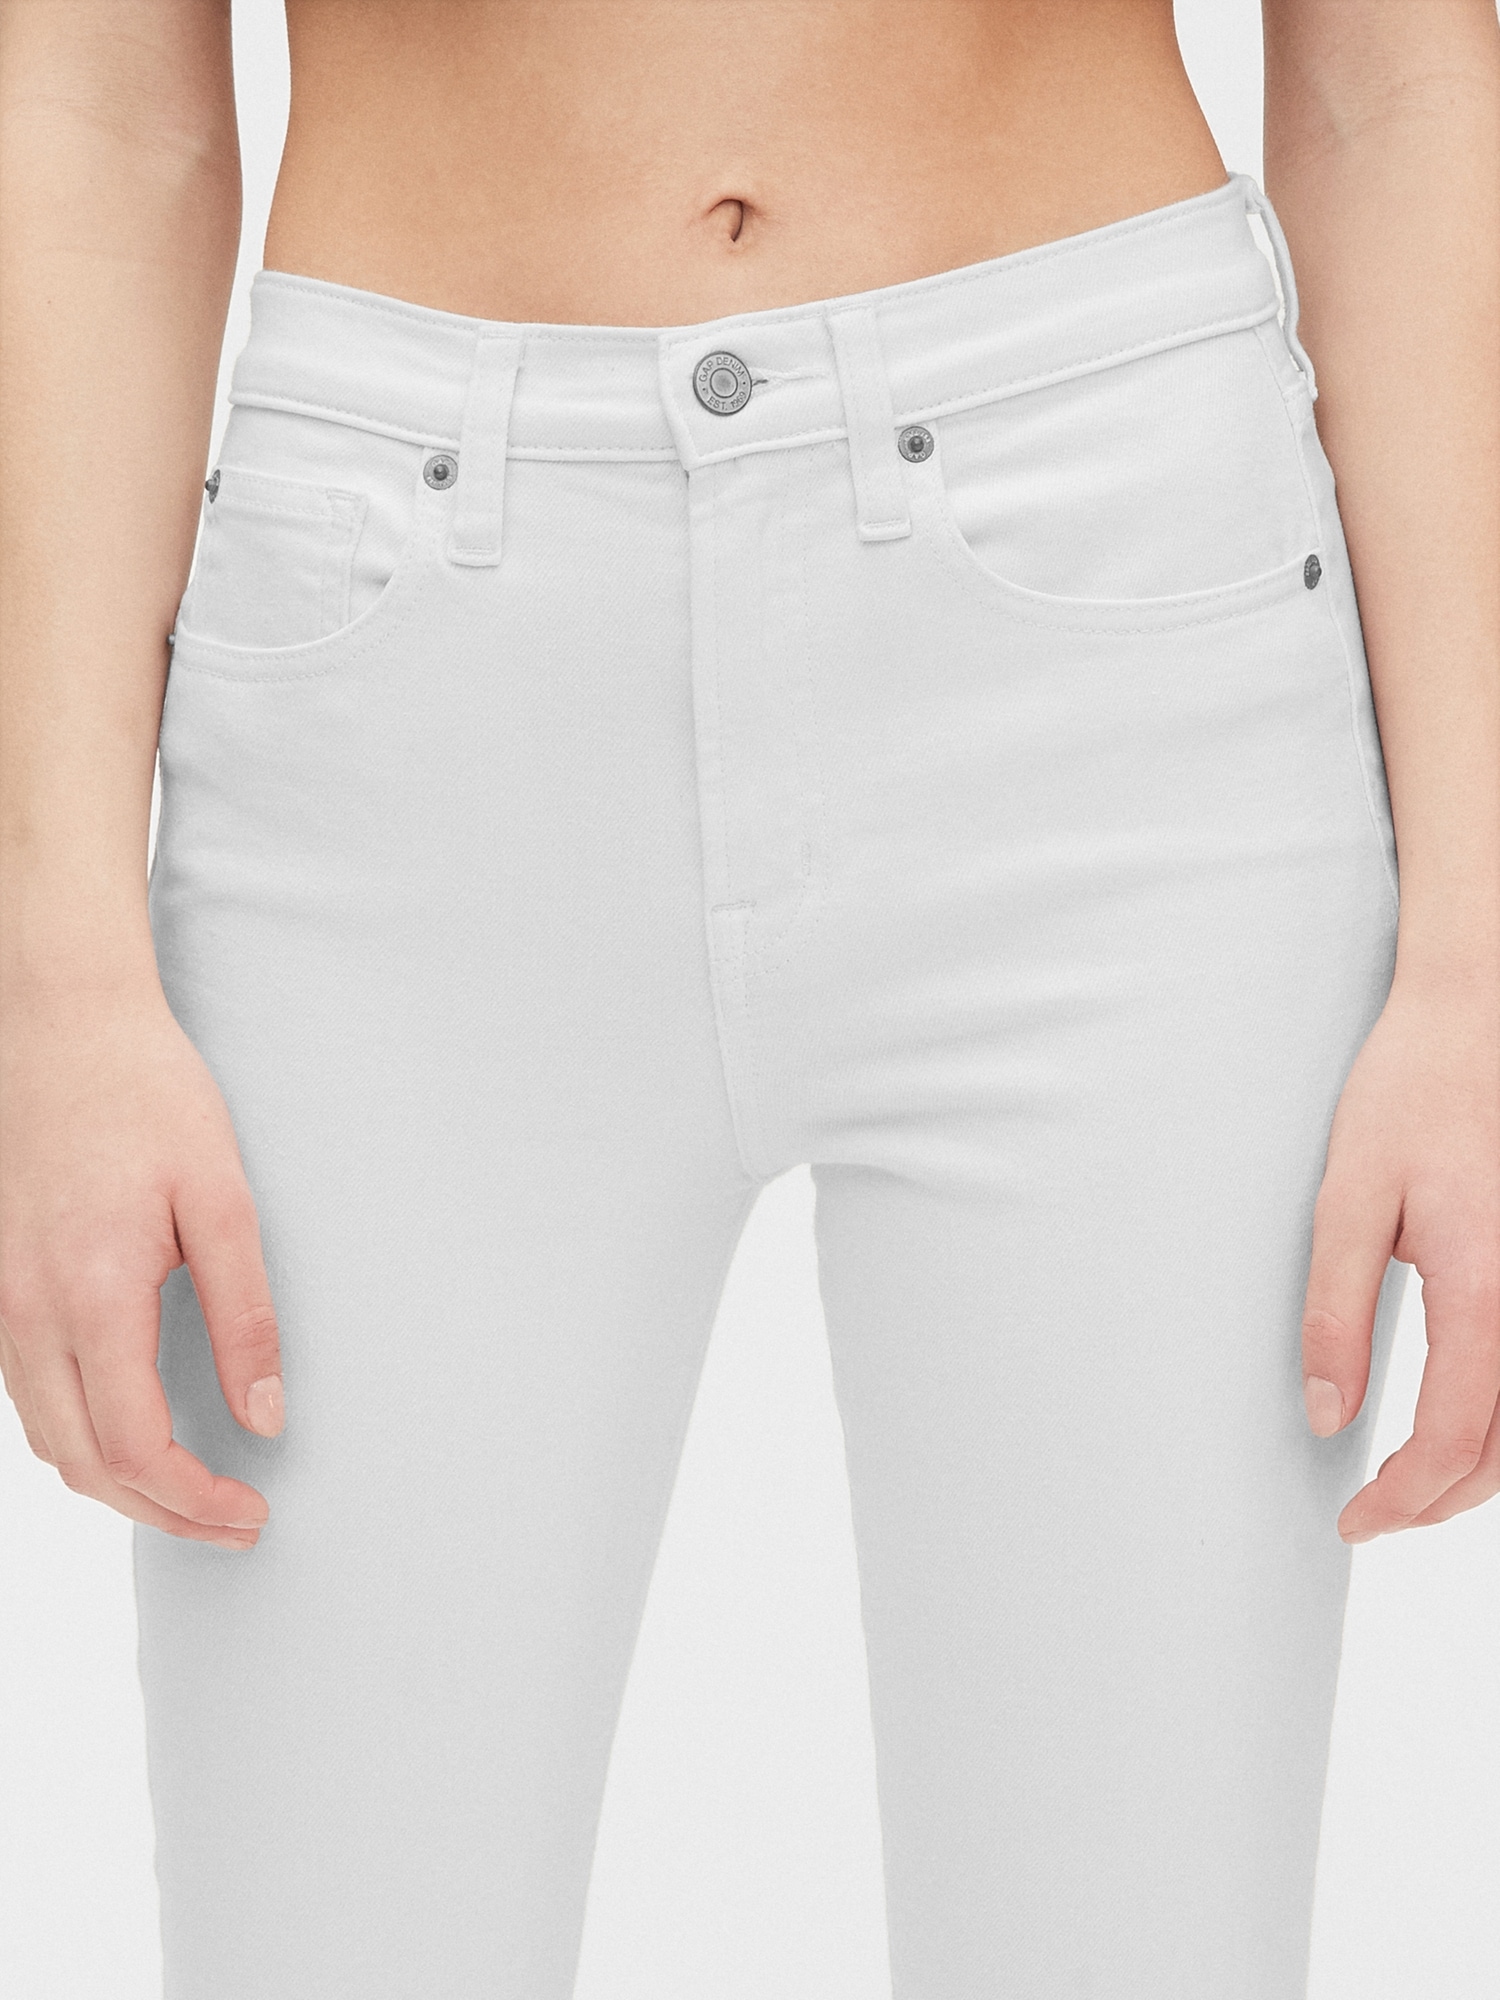 High Rise True Skinny Ankle Jeans | Gap